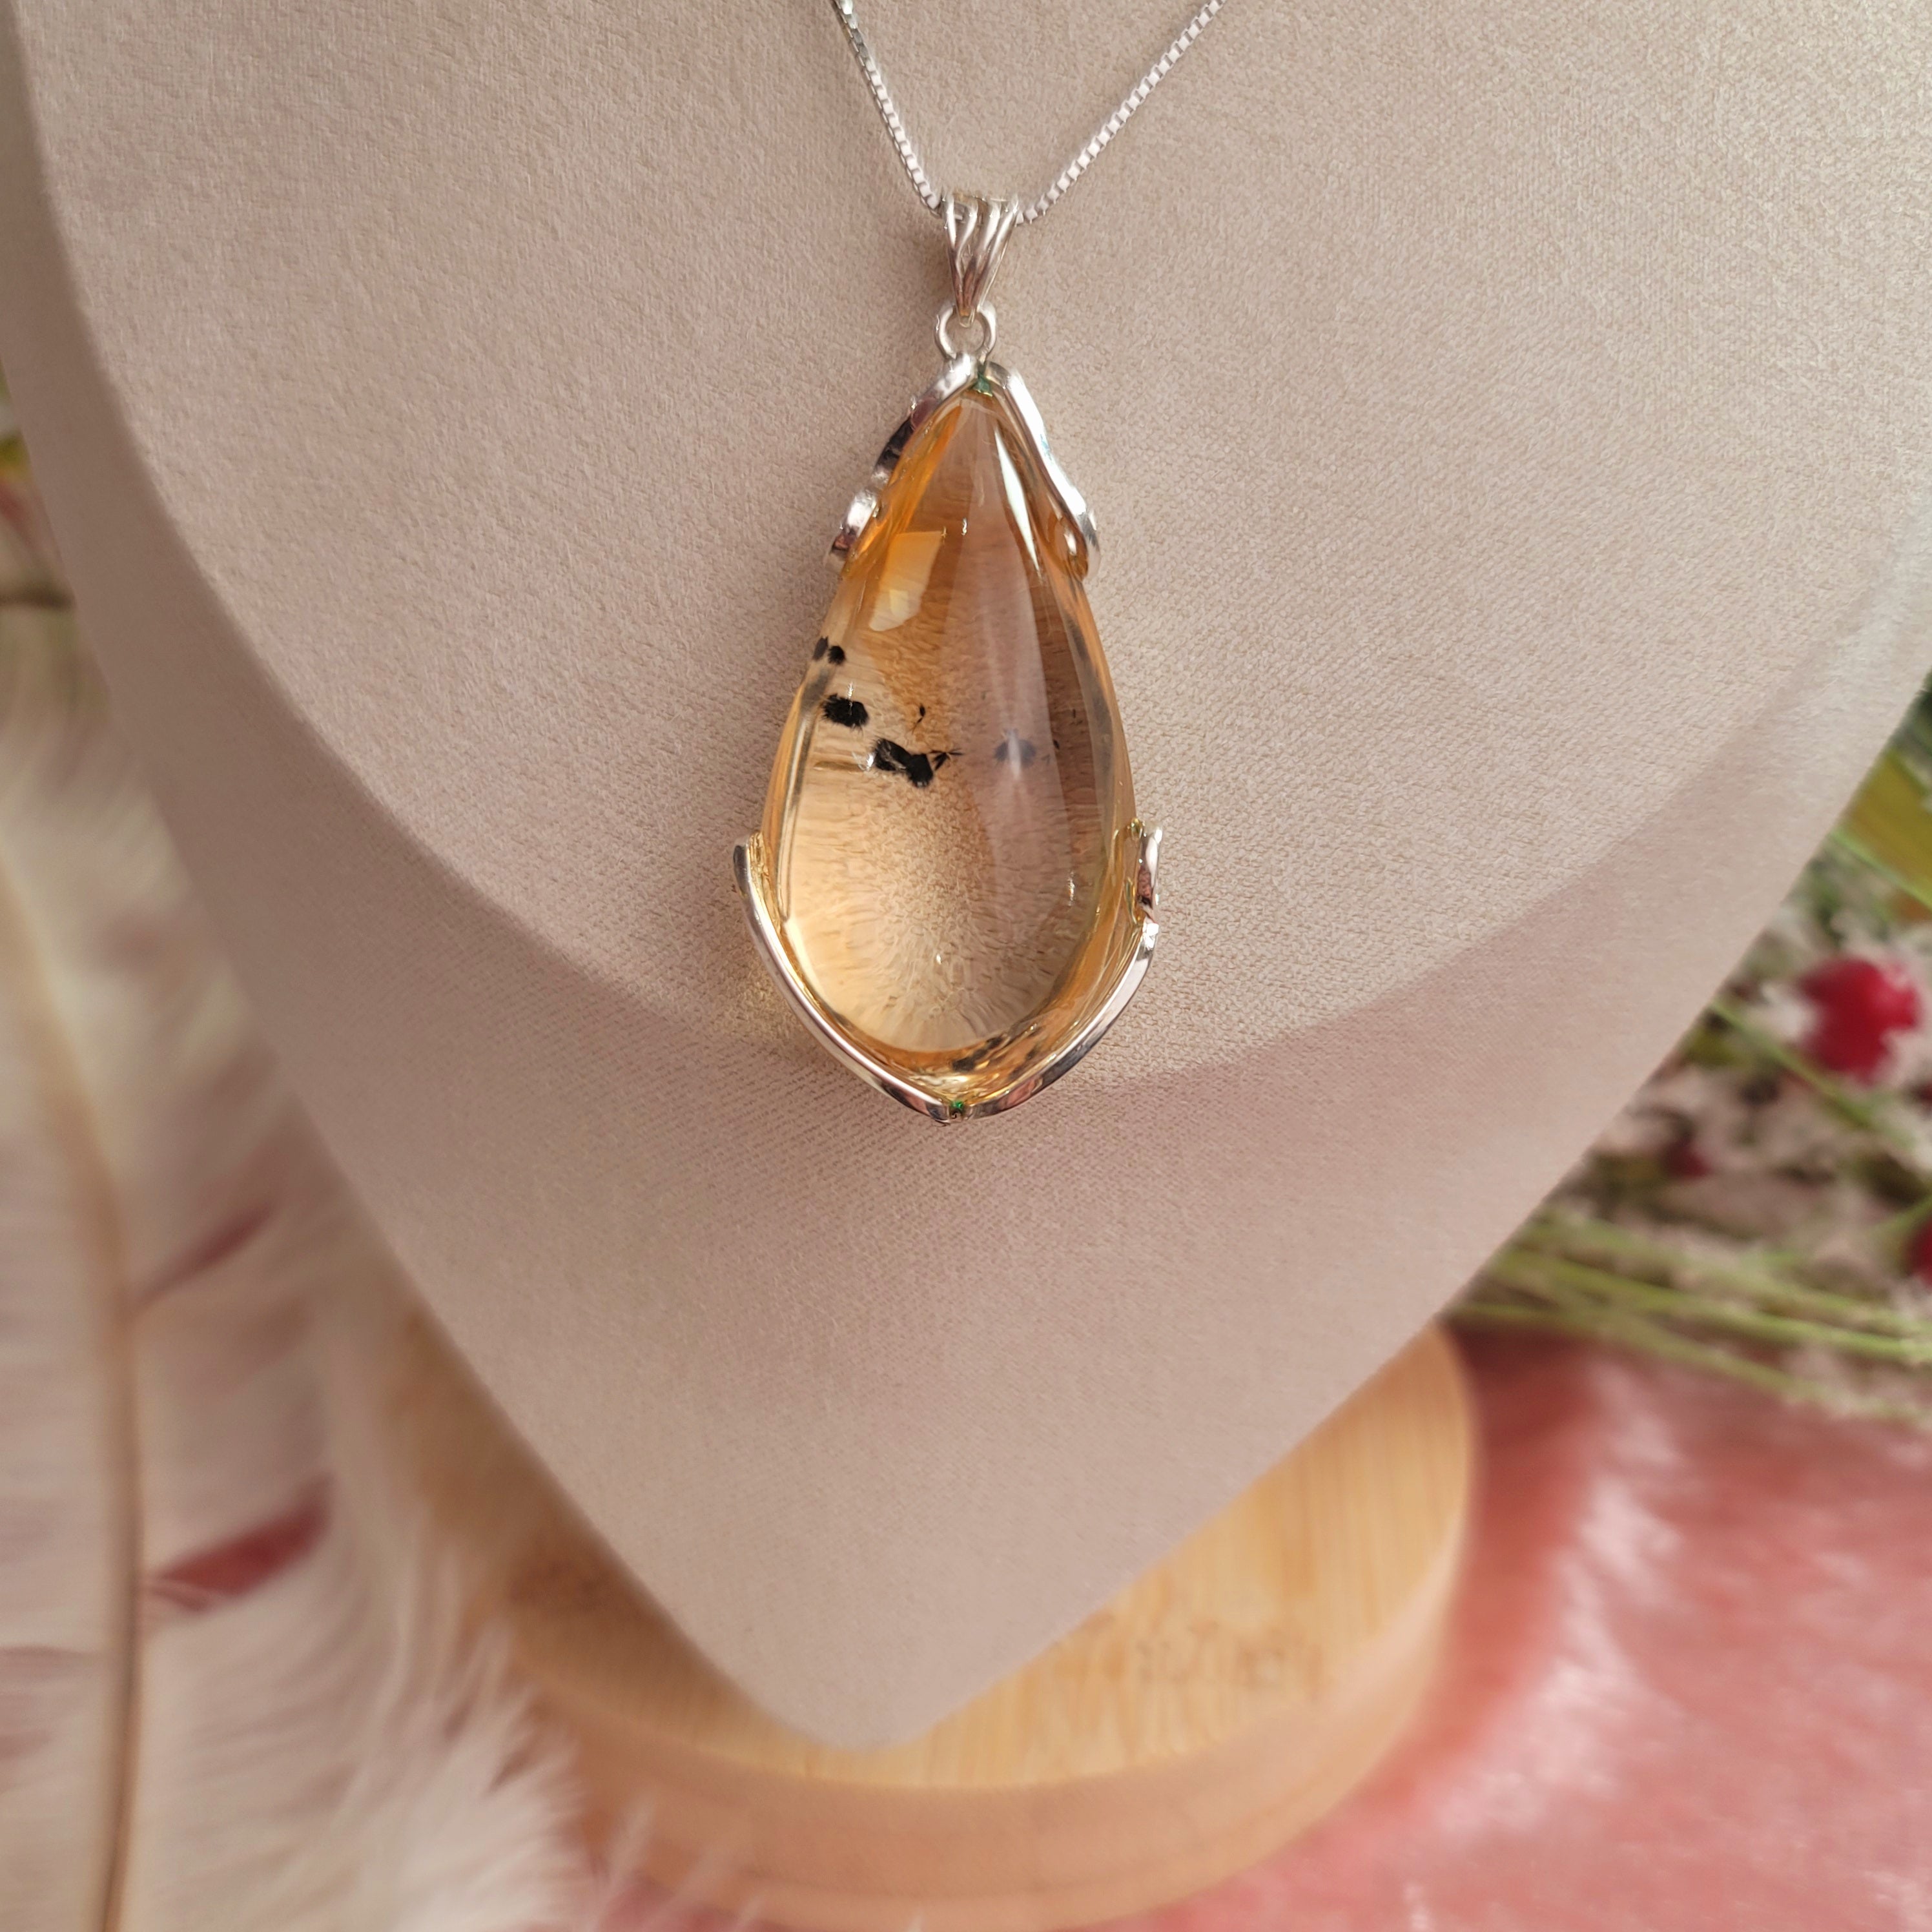 Citrine with Hollandite Inclusion Necklace for Attracting Abundance and Positivity